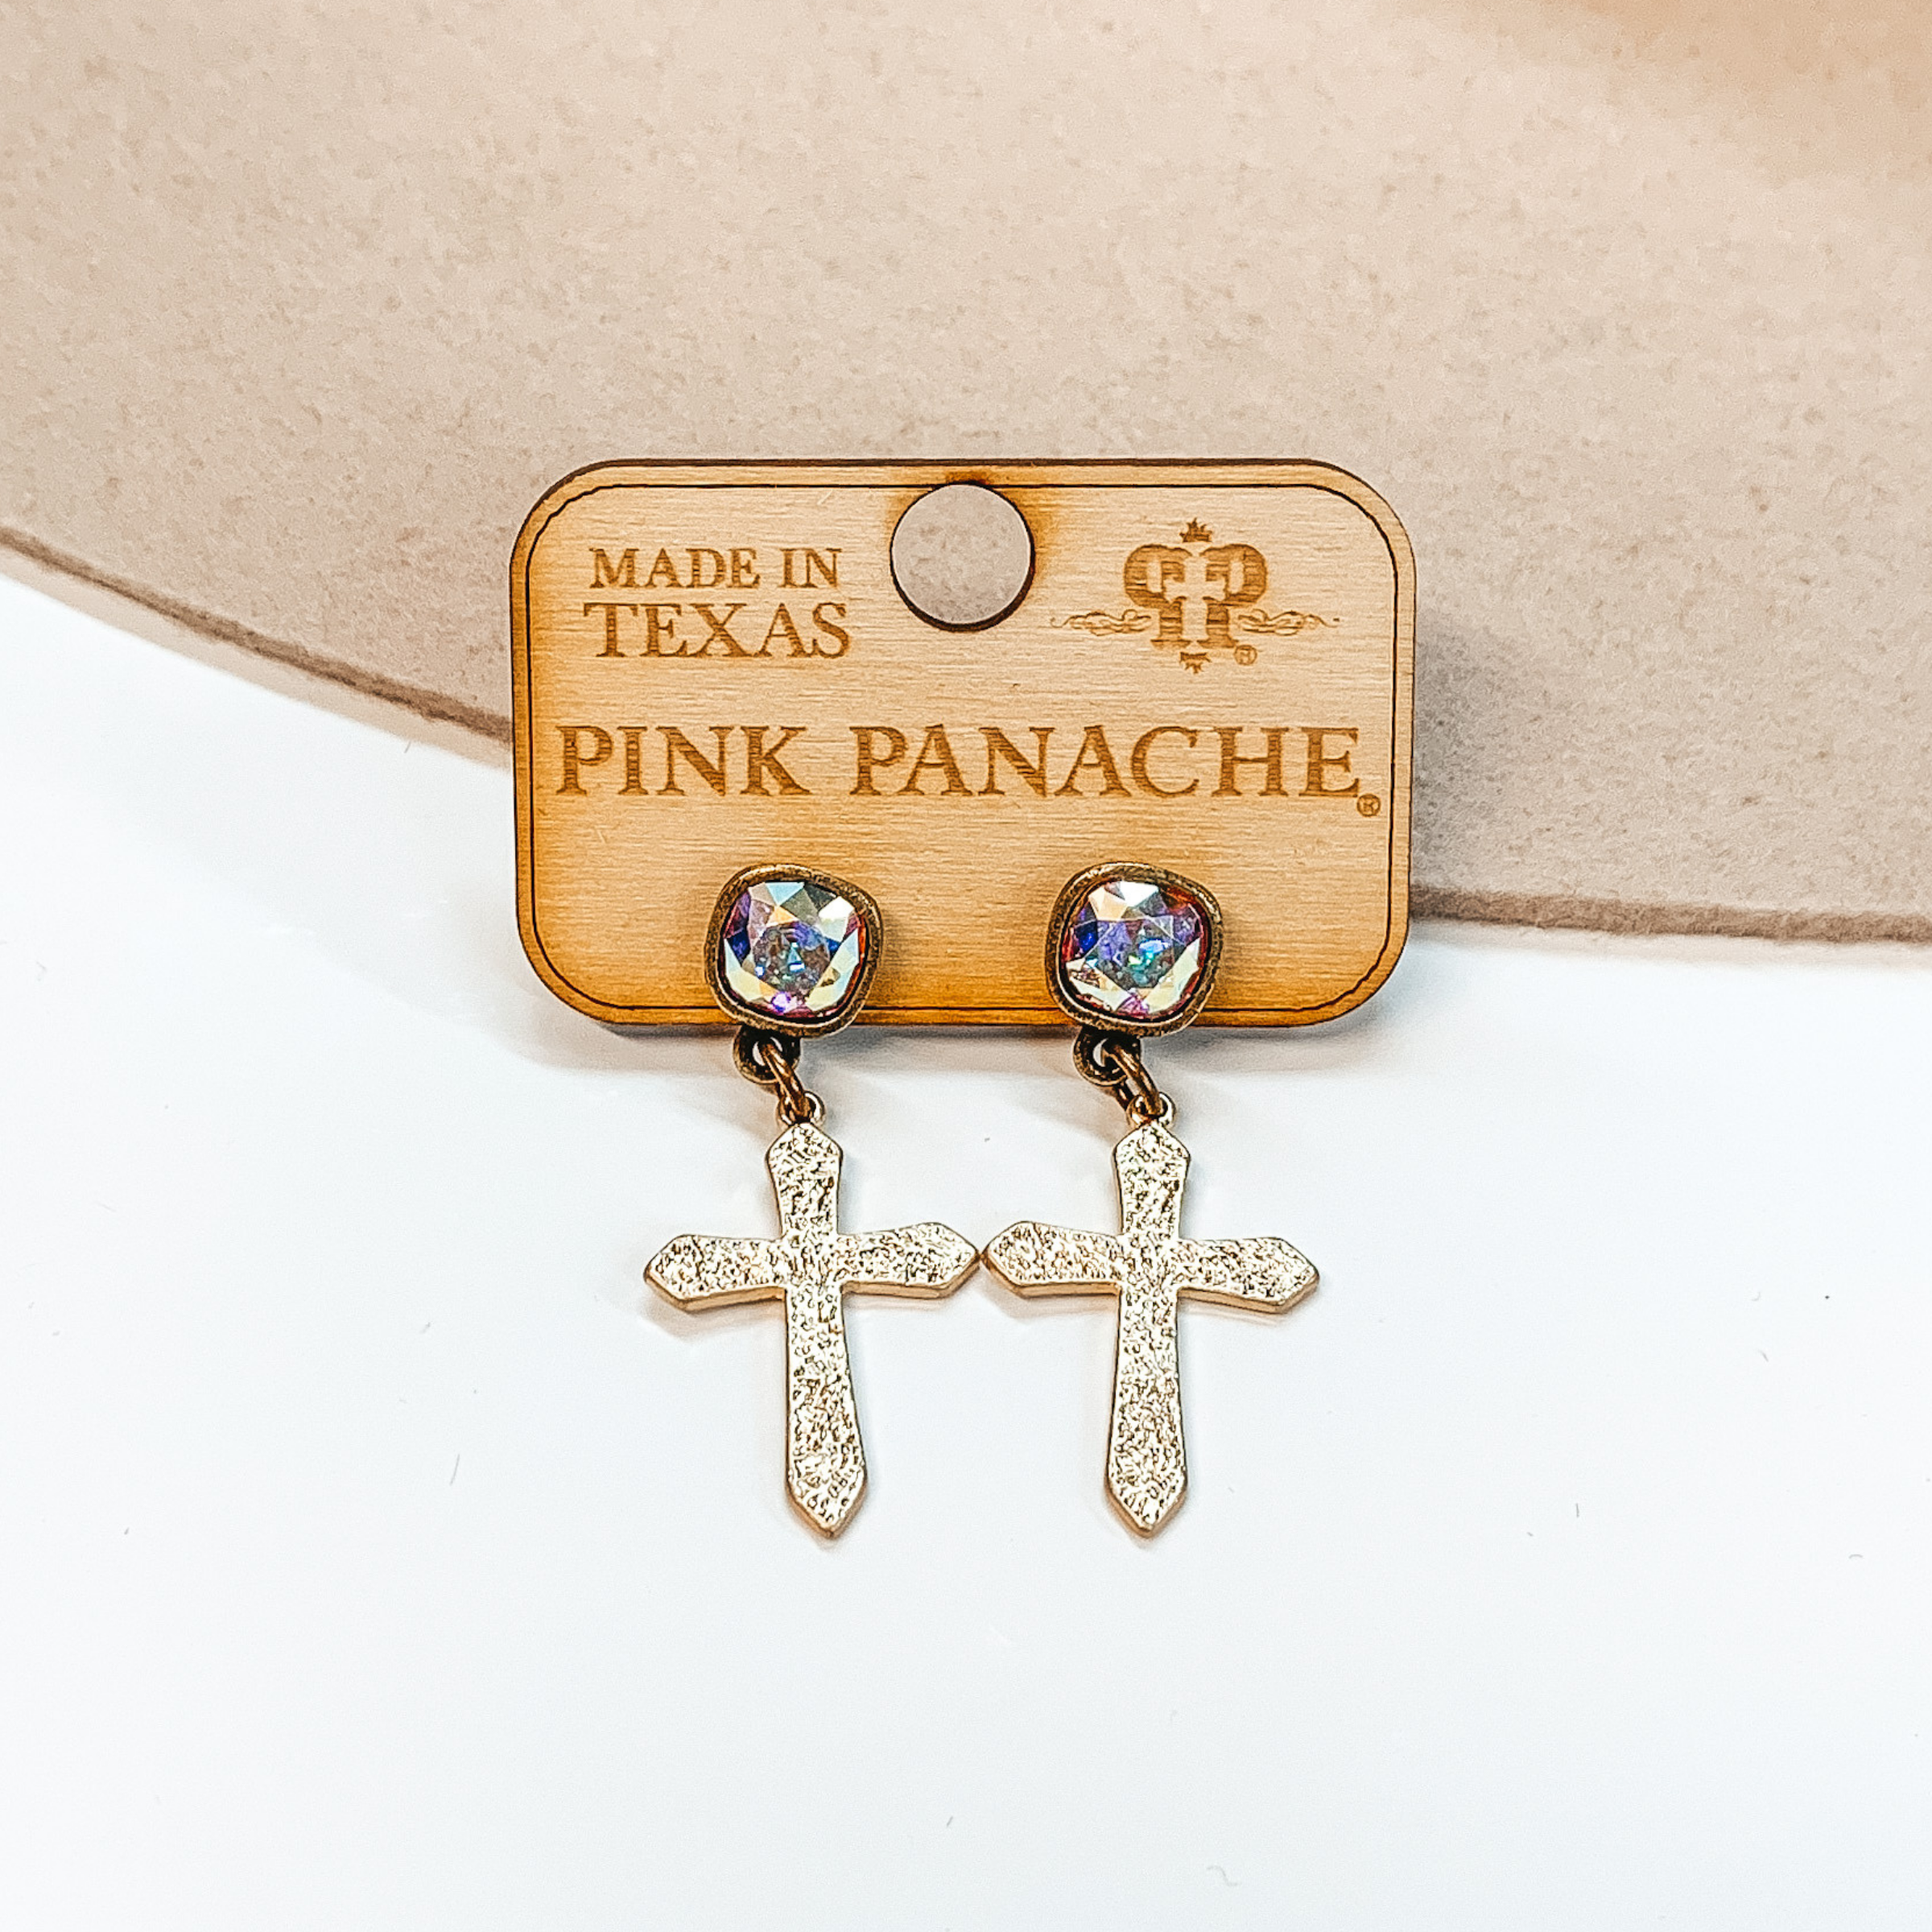 Ab cushion cut crystal stud earrings with a hanging gold, textured cross pendant. These earrings are pictured on a white and tan background. 